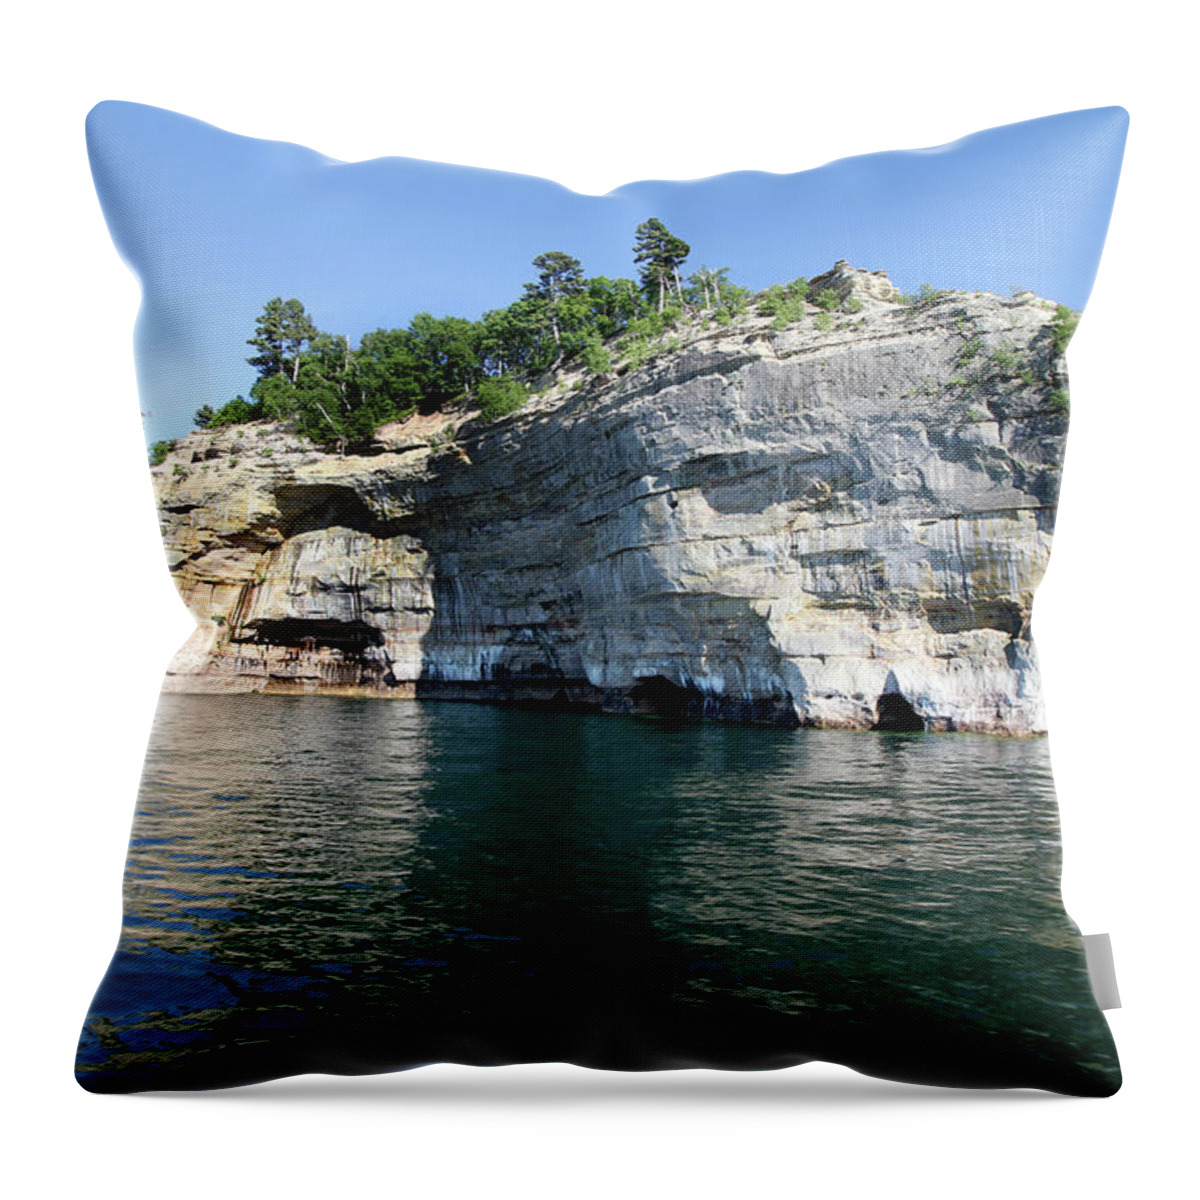 Pictured Rocks Throw Pillow featuring the photograph Pictured Rocks National Lakeshore by Jackson Pearson